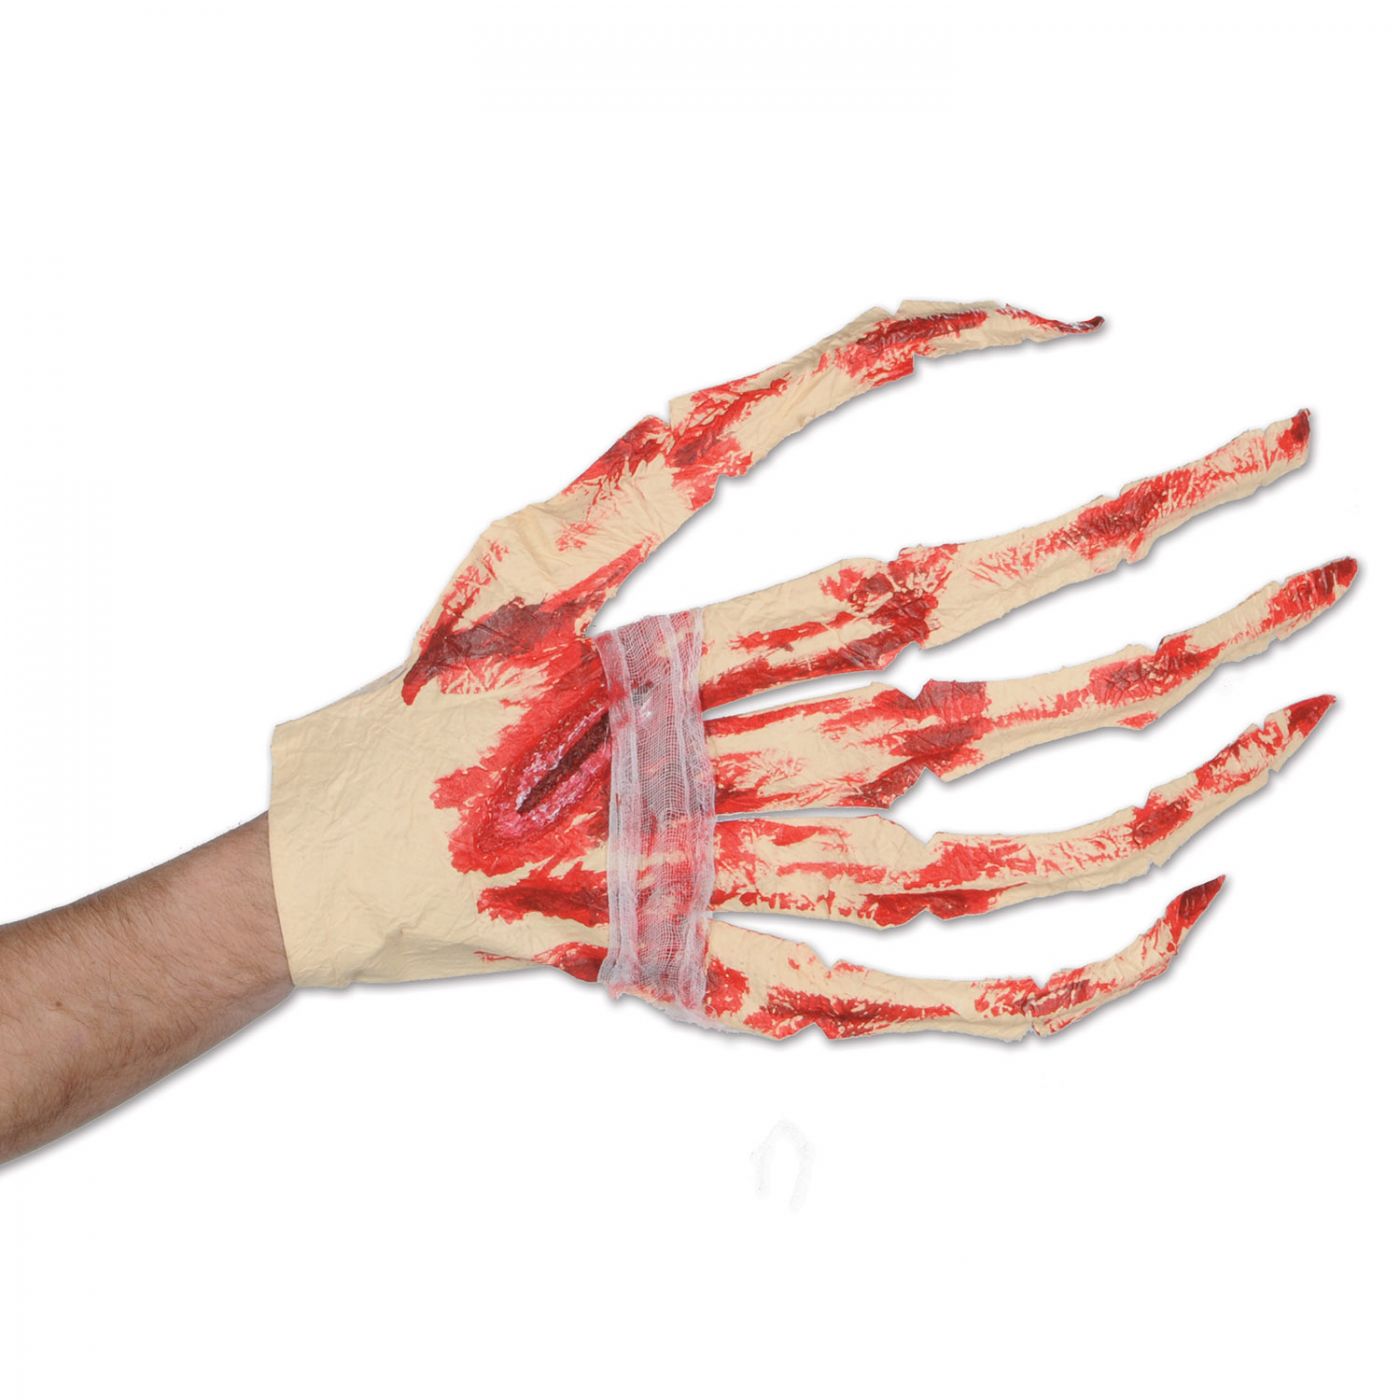 Image of Bloody Glove (12)